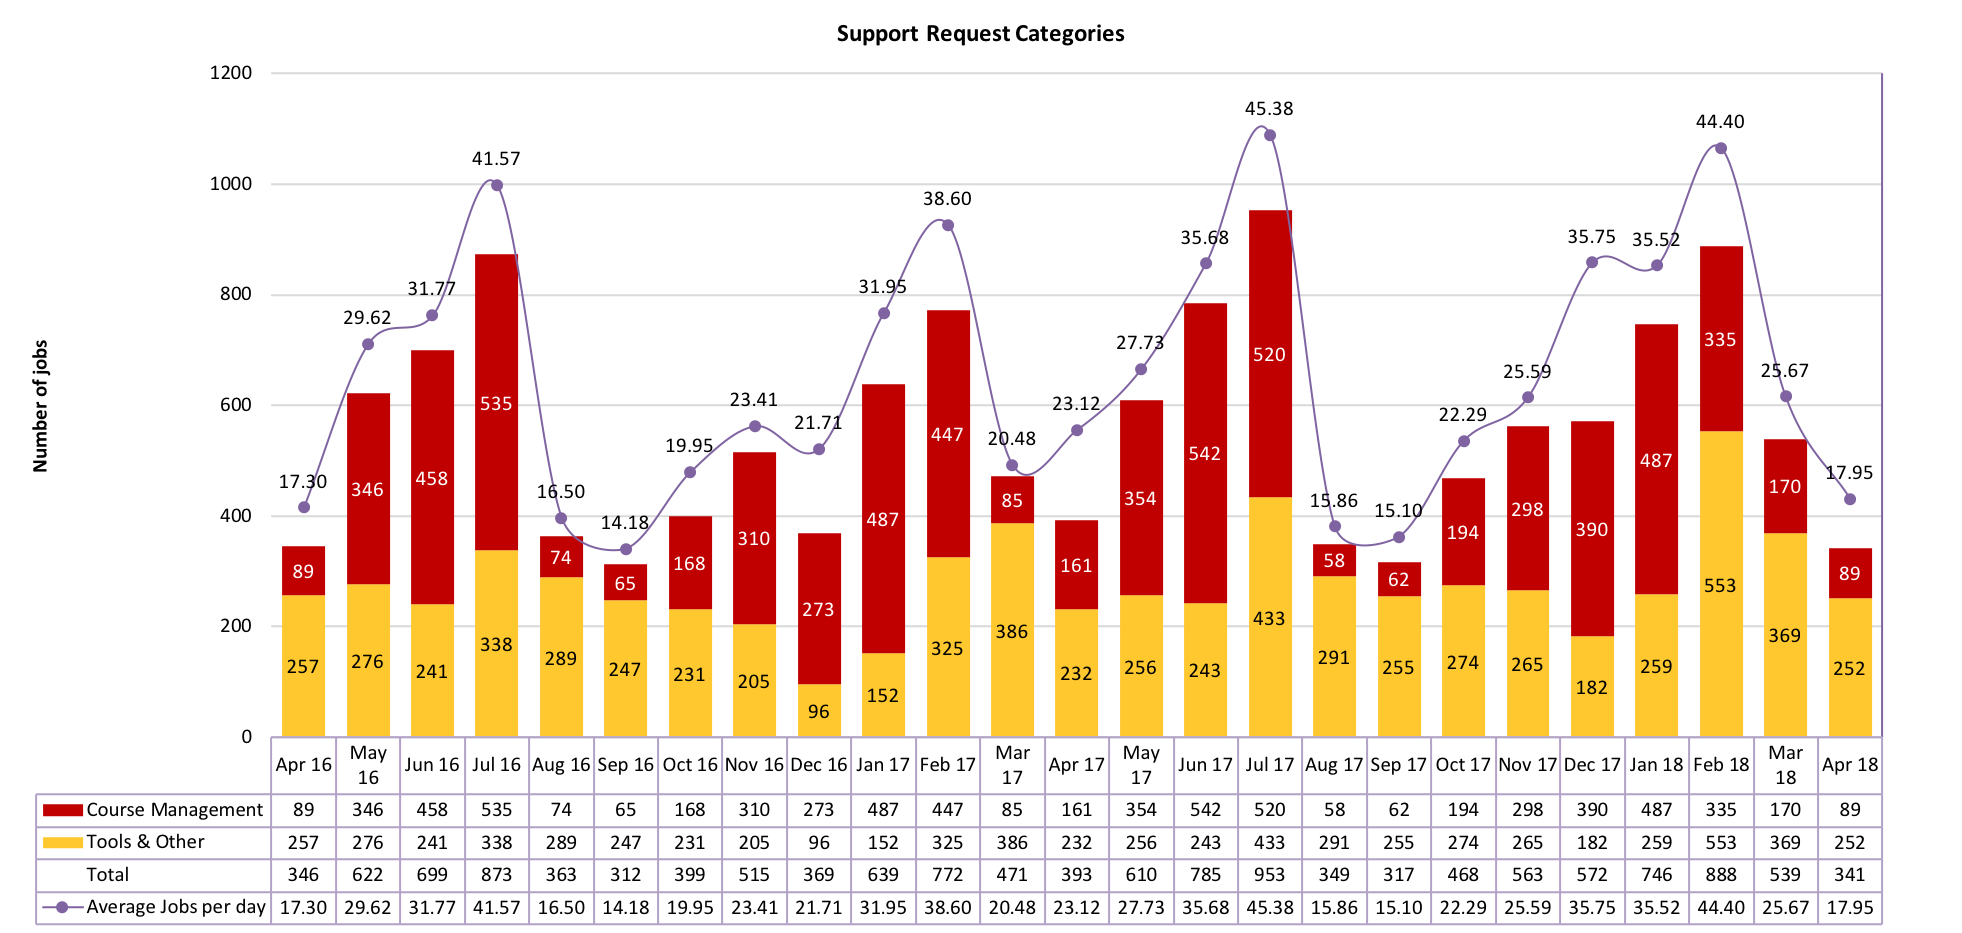 Chart of Support Request Categories from April 2016 to April 2018